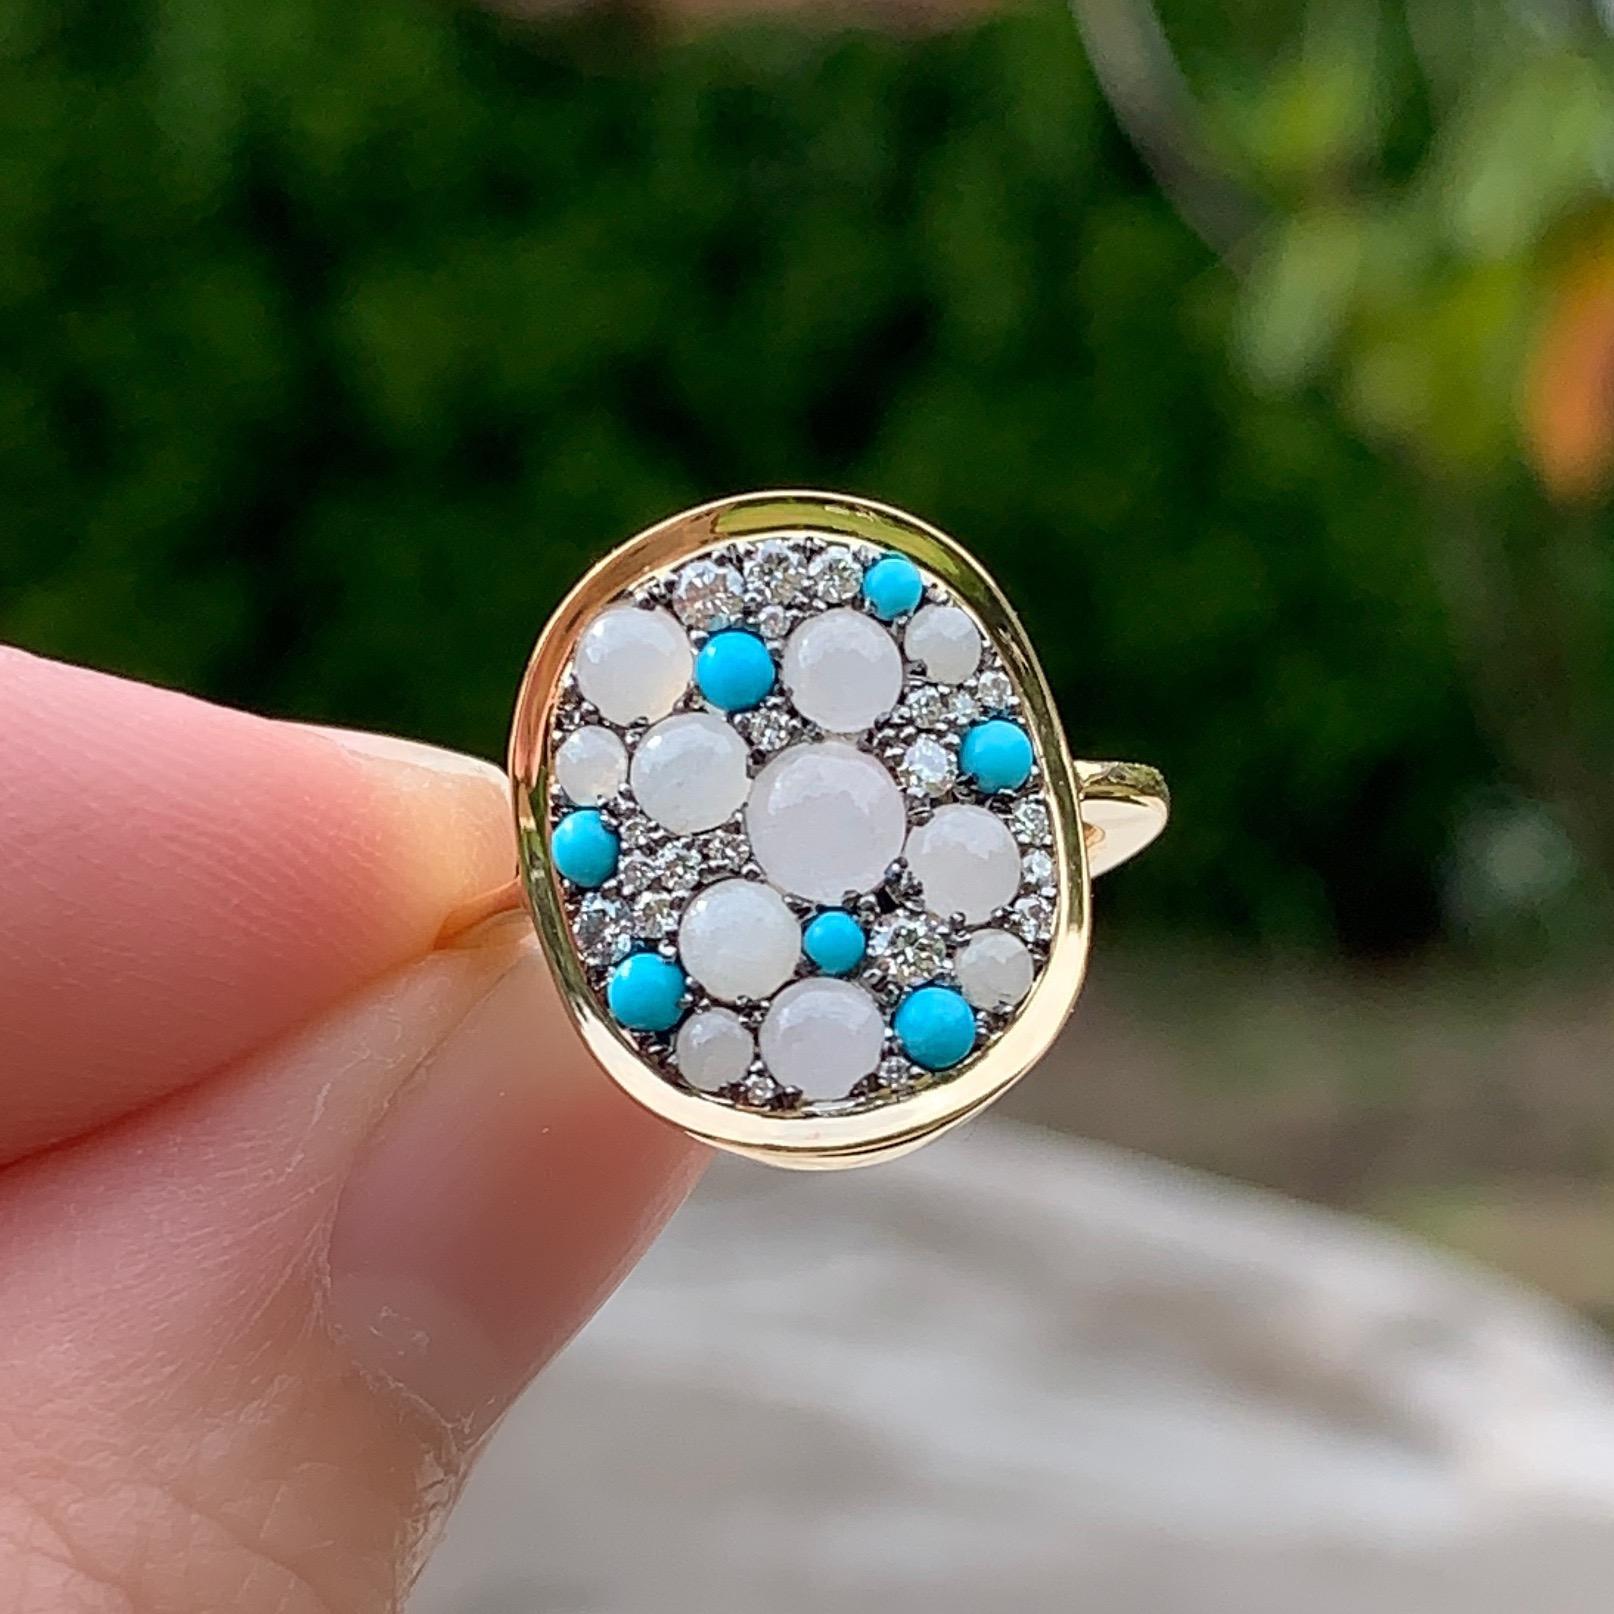 One of a kind ring in 18K yellow gold 5,5 g & blackened sterling silver (The stones are set on blackened silver to create a black background for the stones)
Pave set with A type White Translucent Burmese Jadeite cabochons, Turquoise cabochons, White